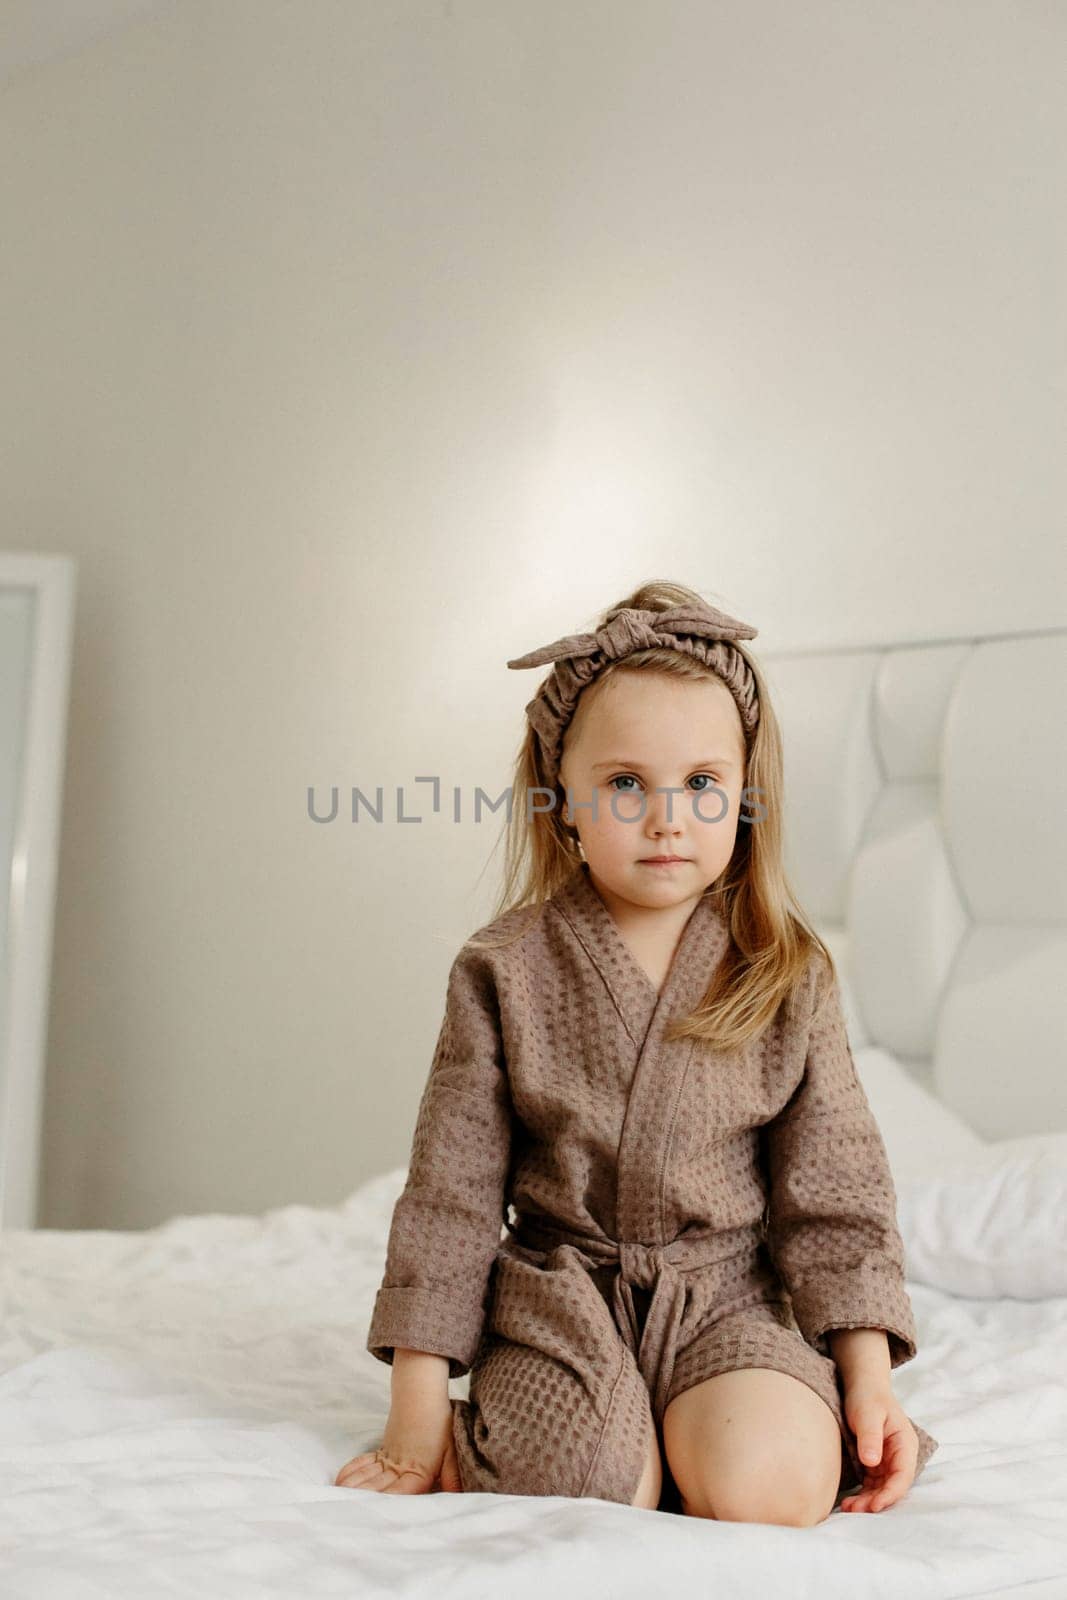 Portrait of a young girl who is sitting in a brown bathrobe on the bed.